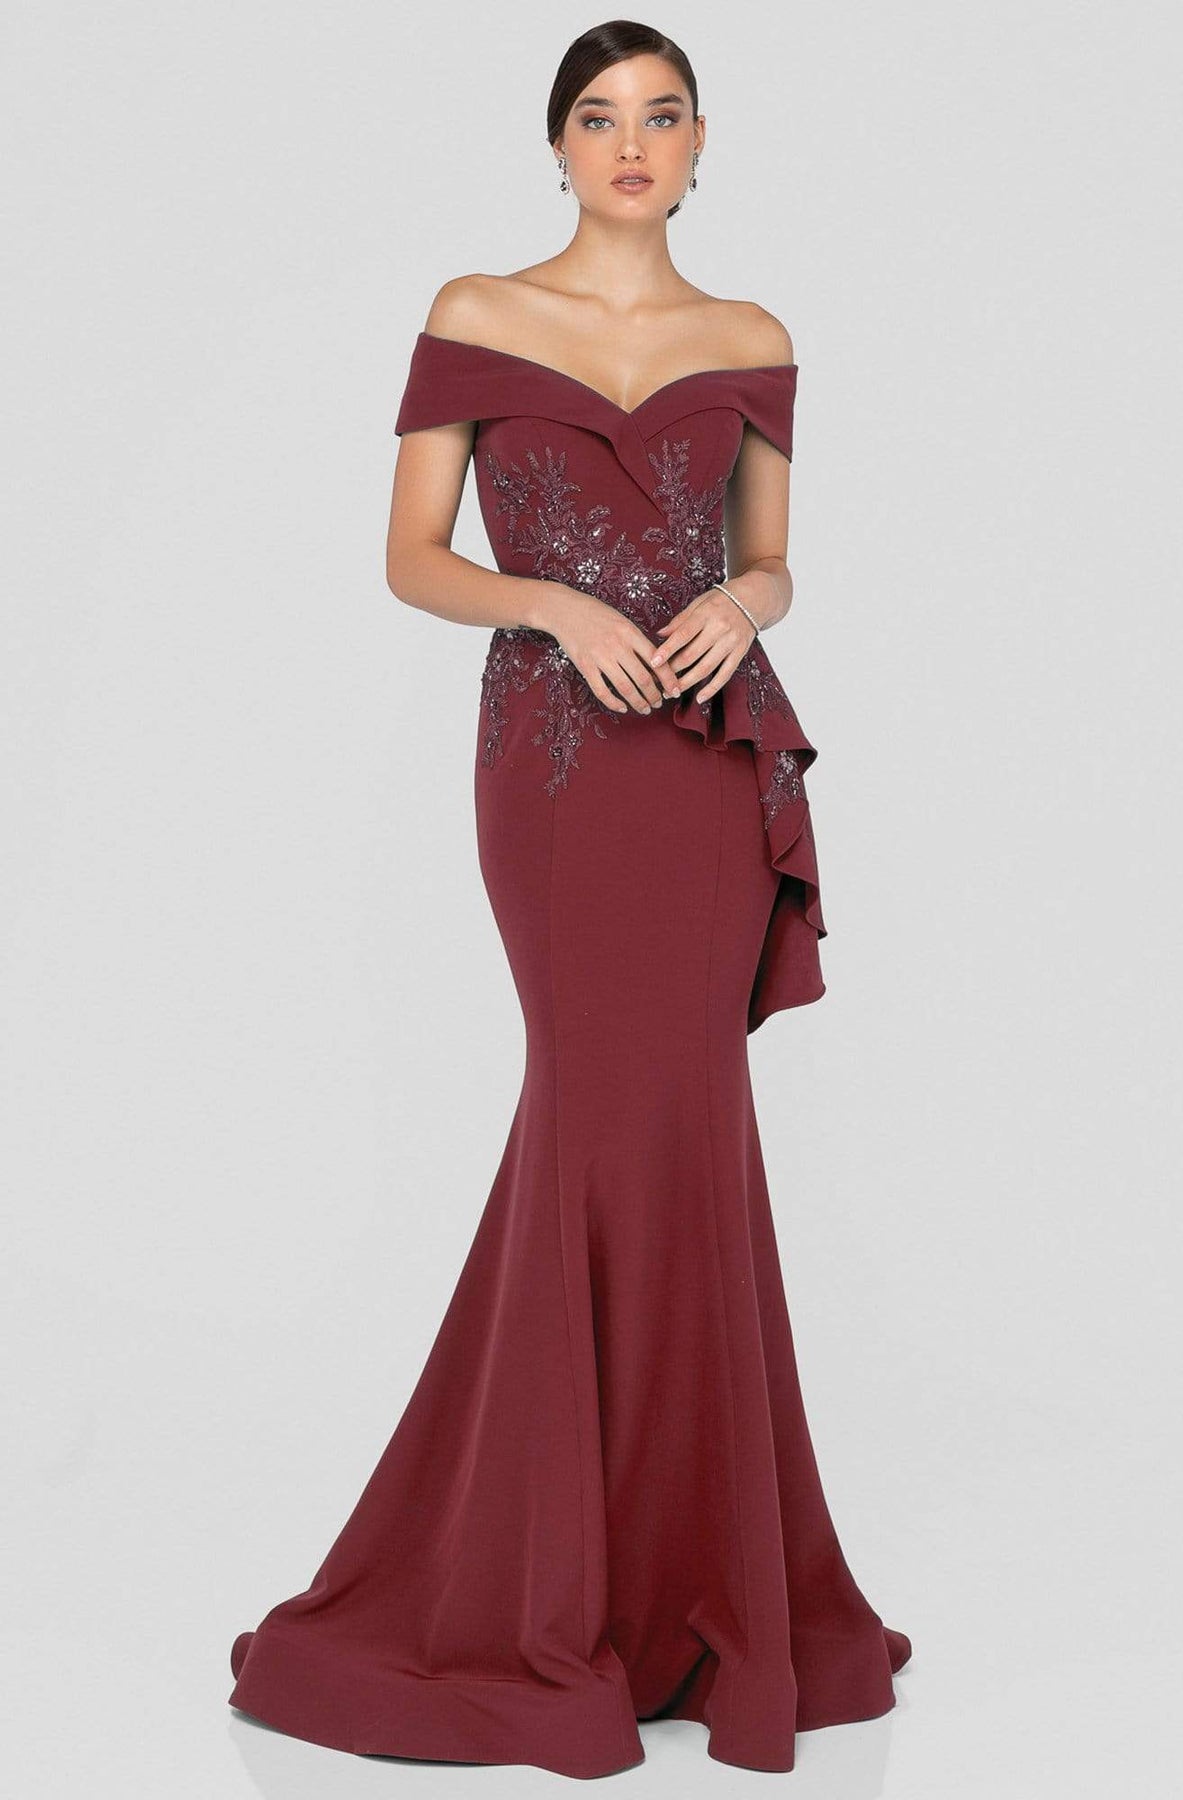 Terani Couture - 1911M9339 Off Shoulder Side Drape Peplum Mermaid Gown Special Occasion Dress 0 / Wine